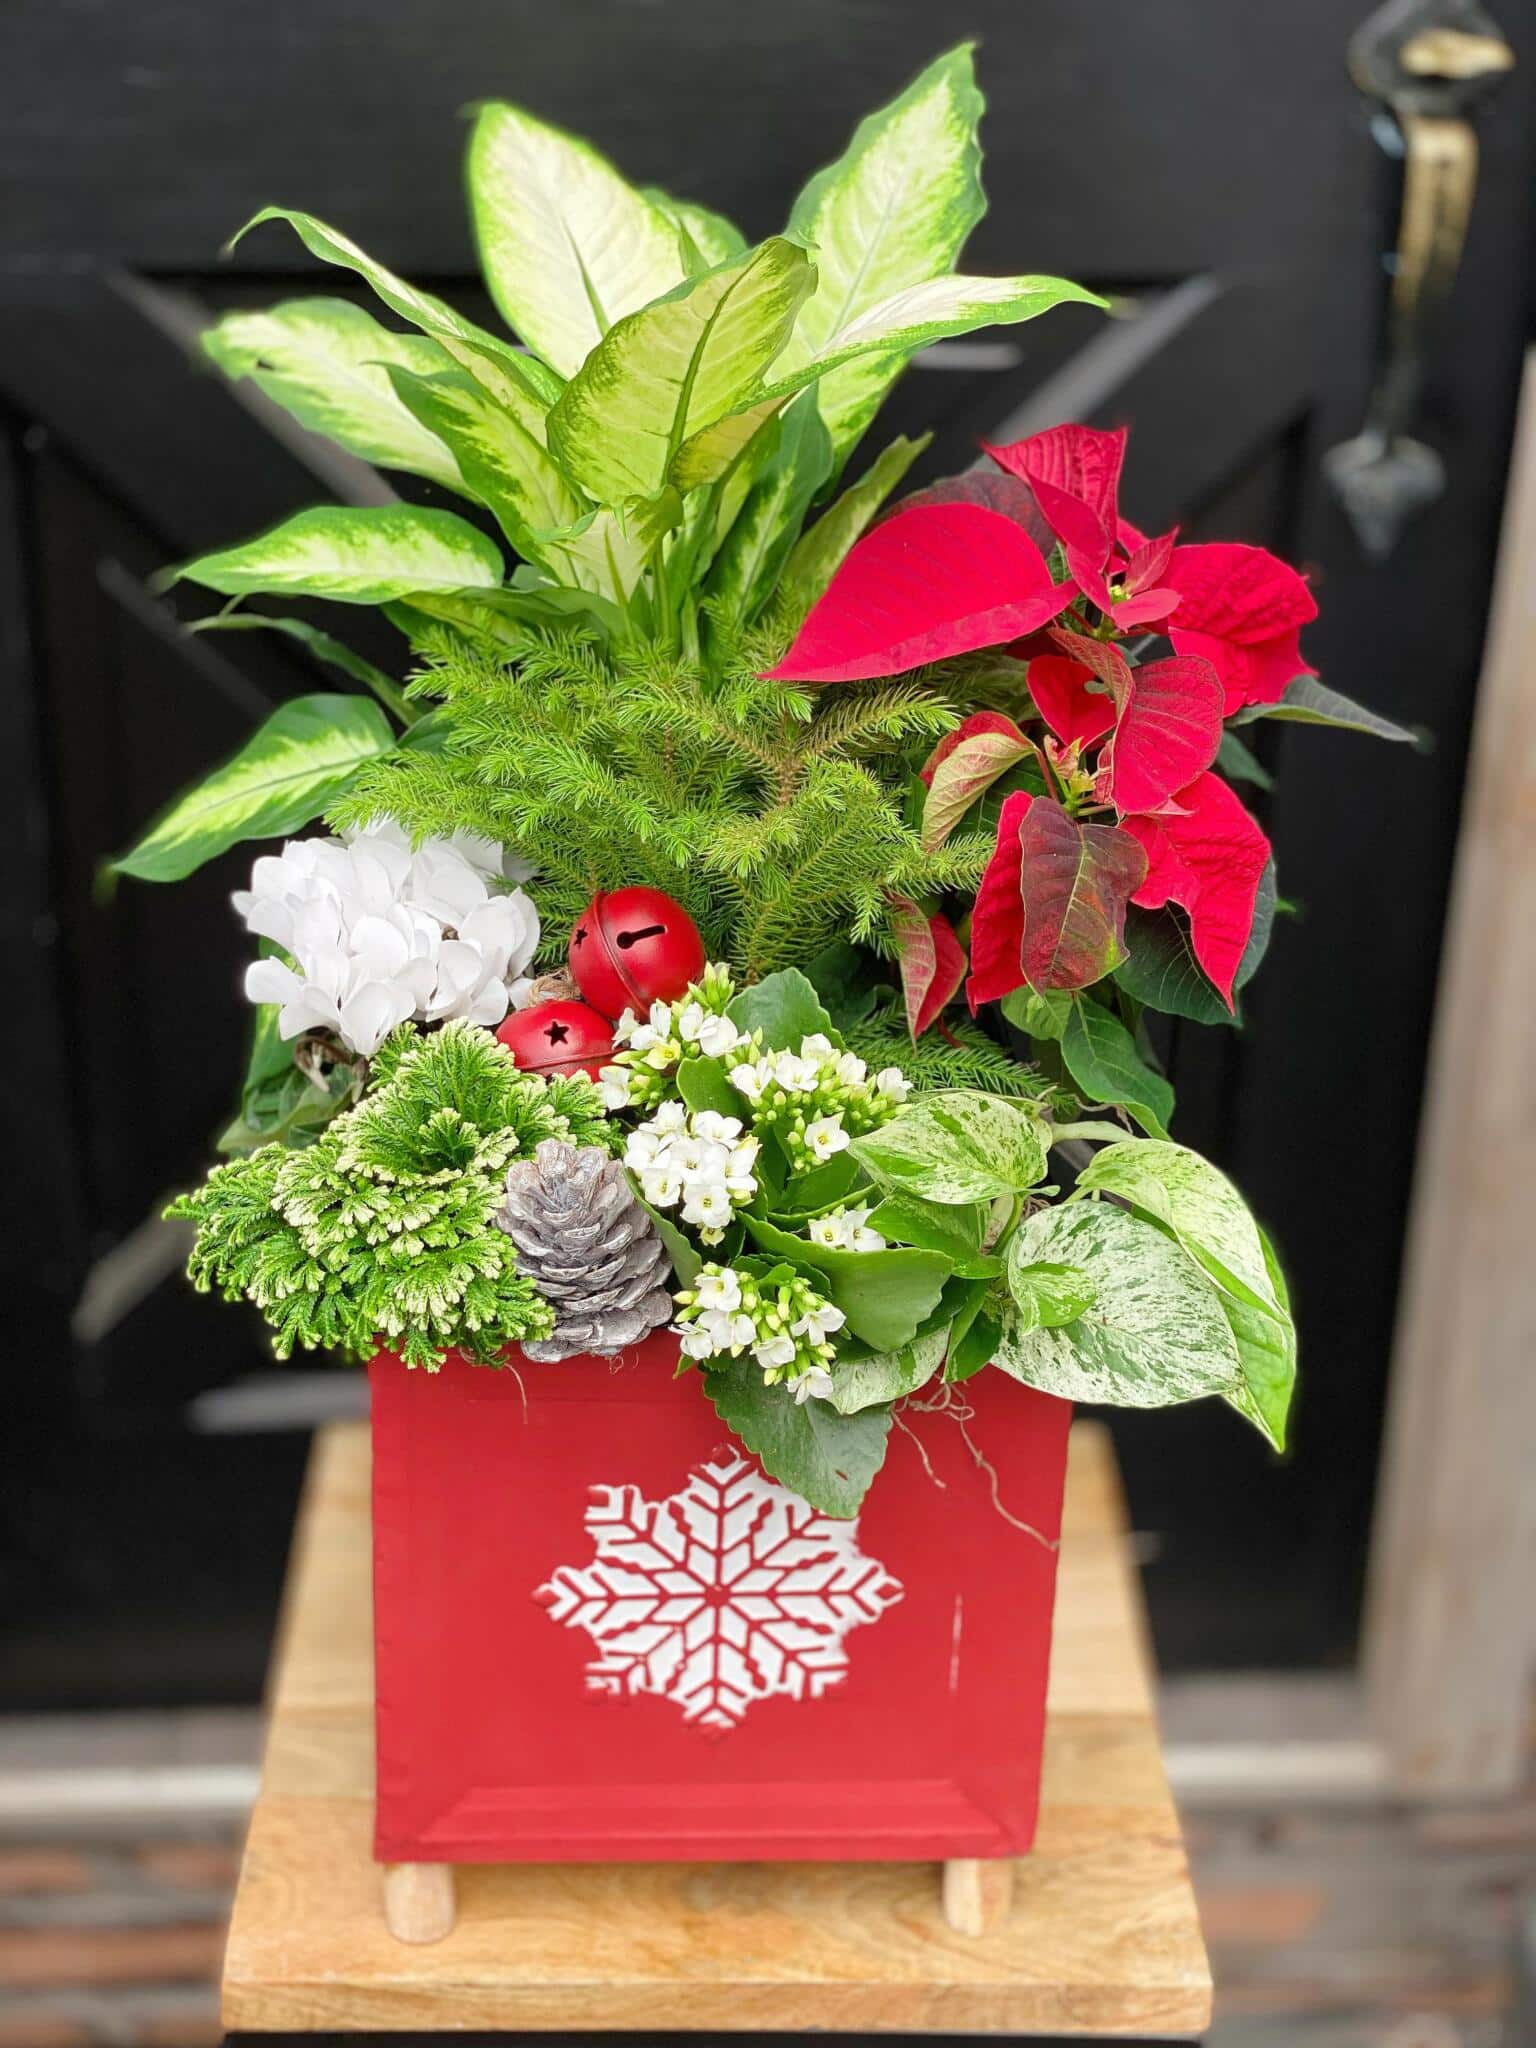 The Watering Can | An exuburant red and white planter in a red square tin with a white snowflake on the side.